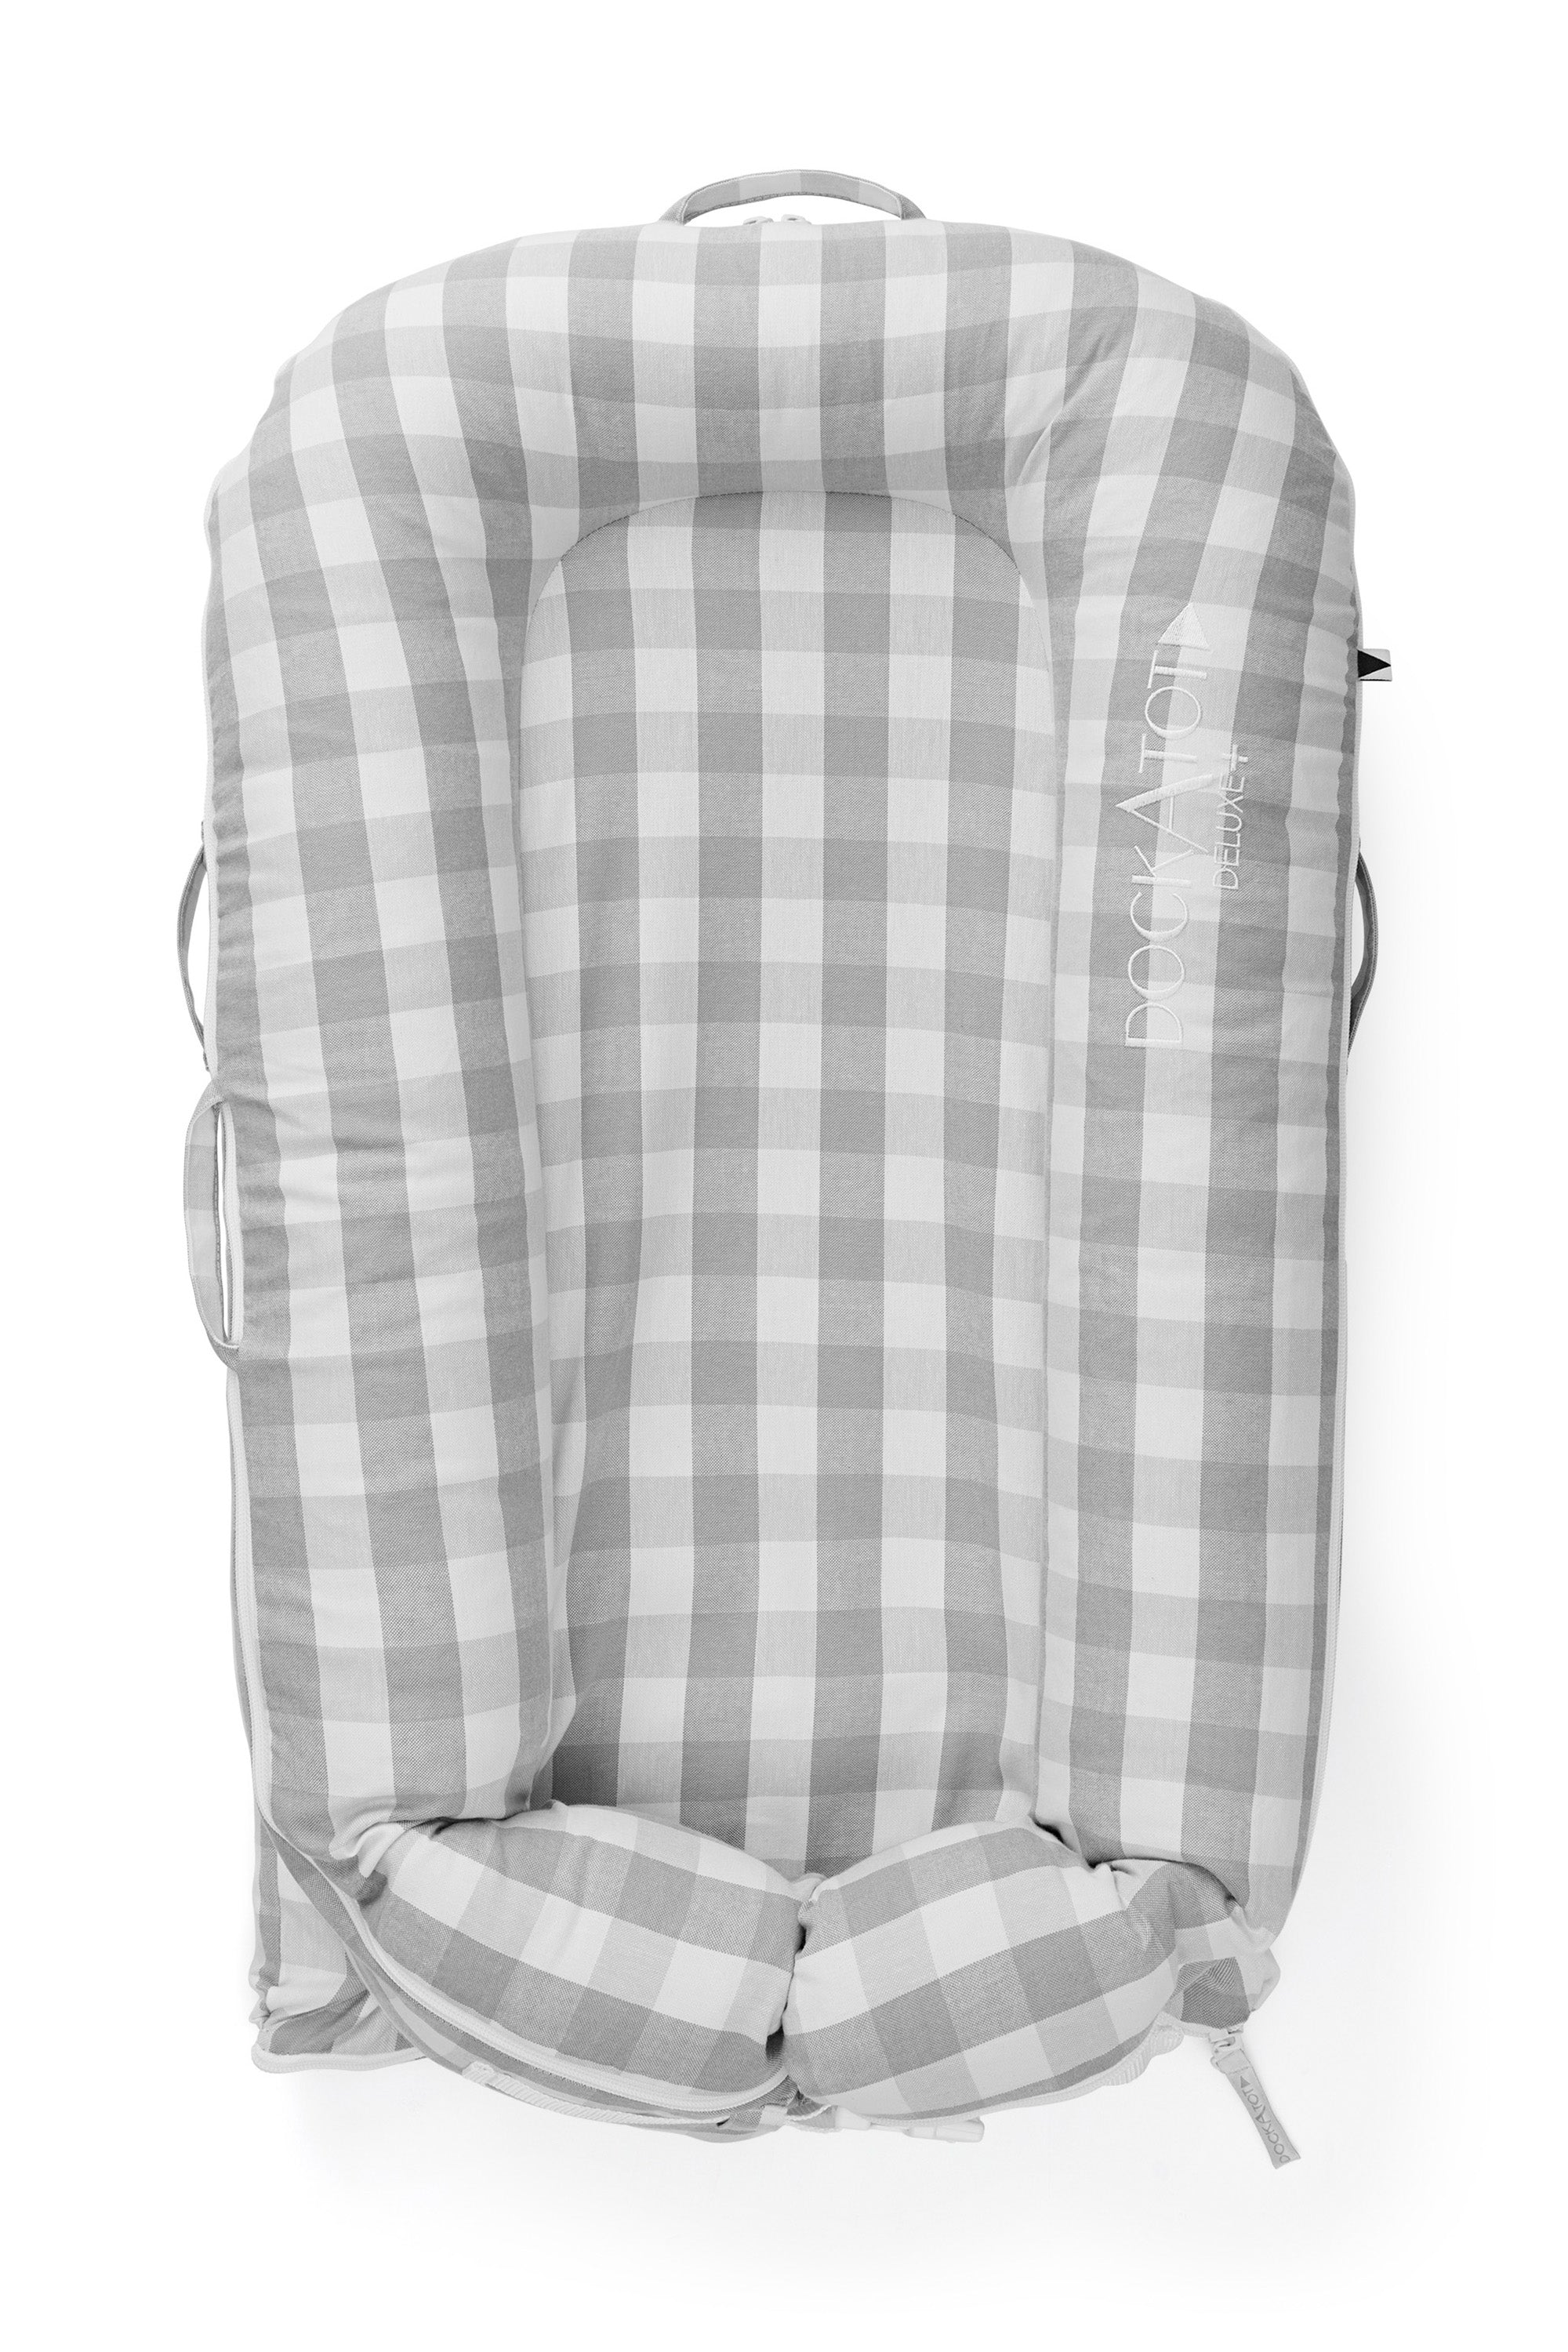 PRE ORDER DockATot Deluxe+ Baby Lounger Stone Gingham - Dispatch 15th March